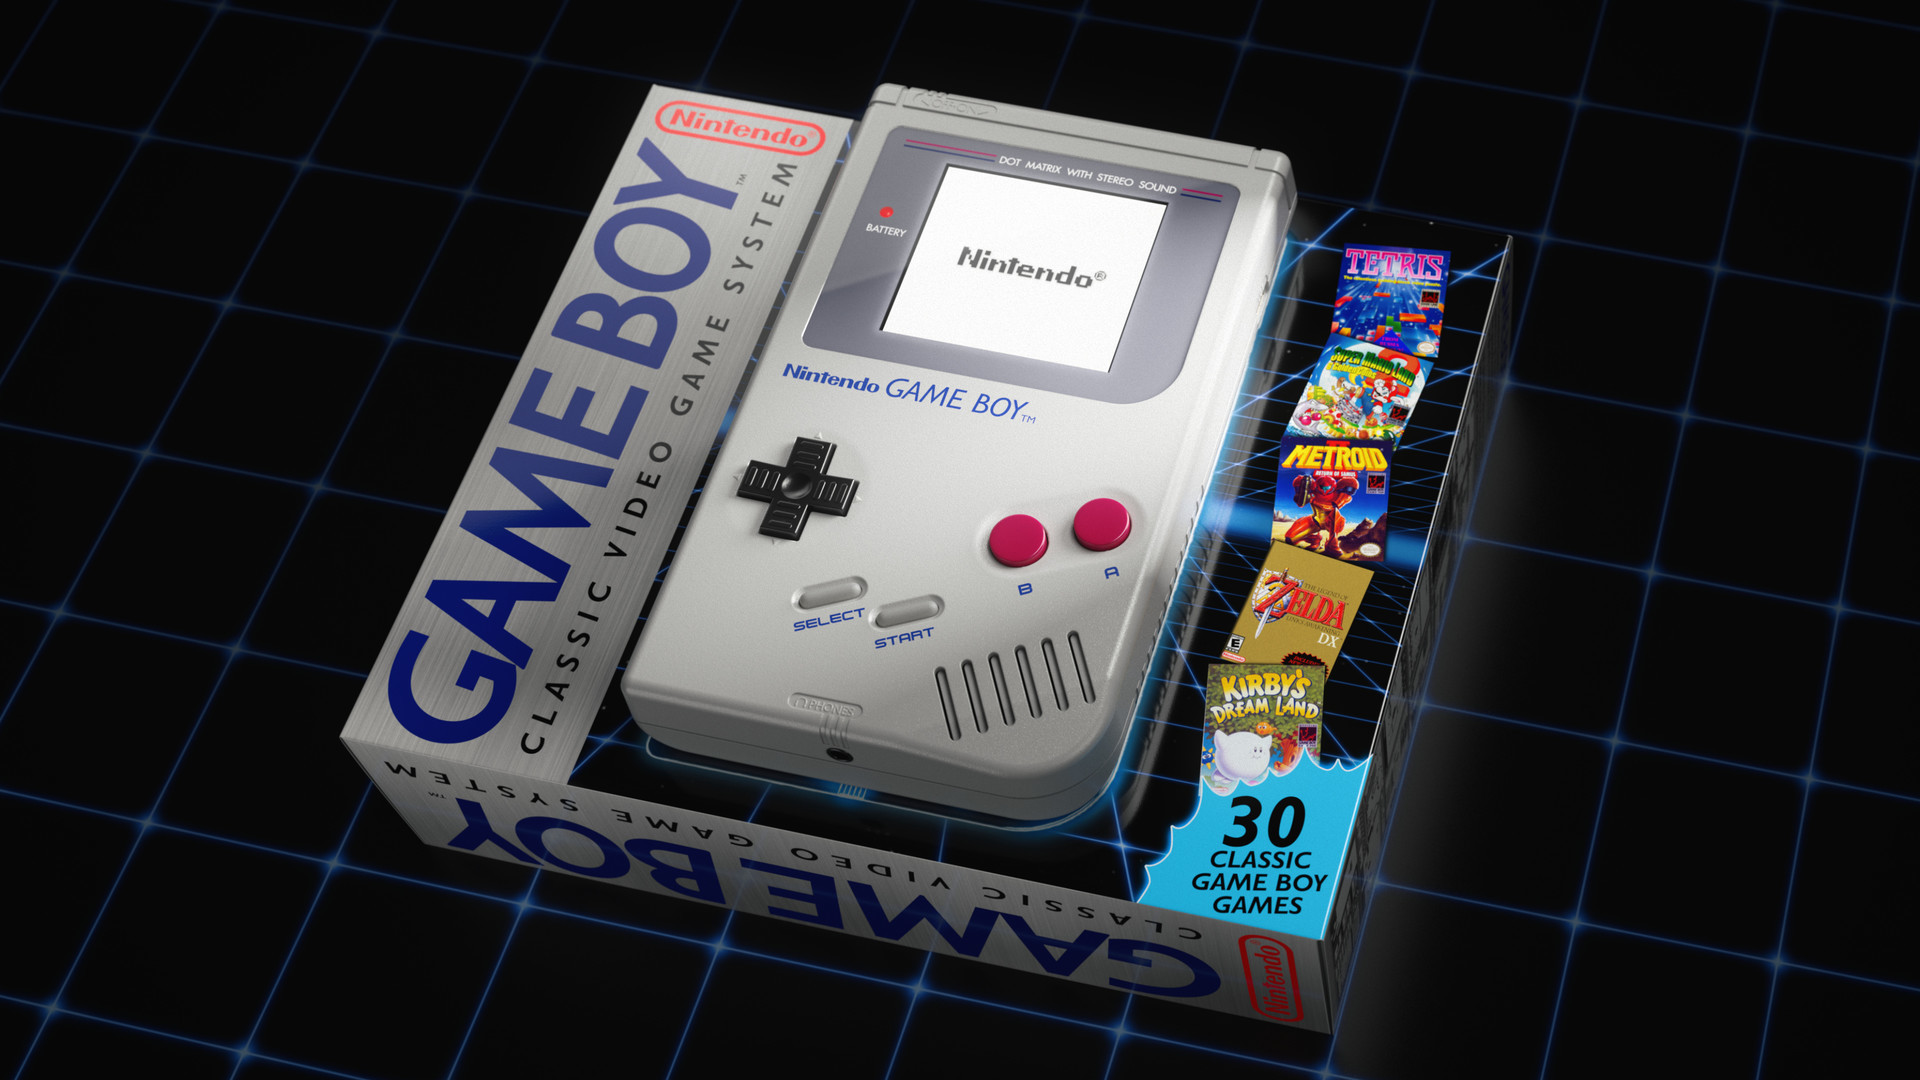 1920x1080 Game Boy Classic Teaser (unofficial)